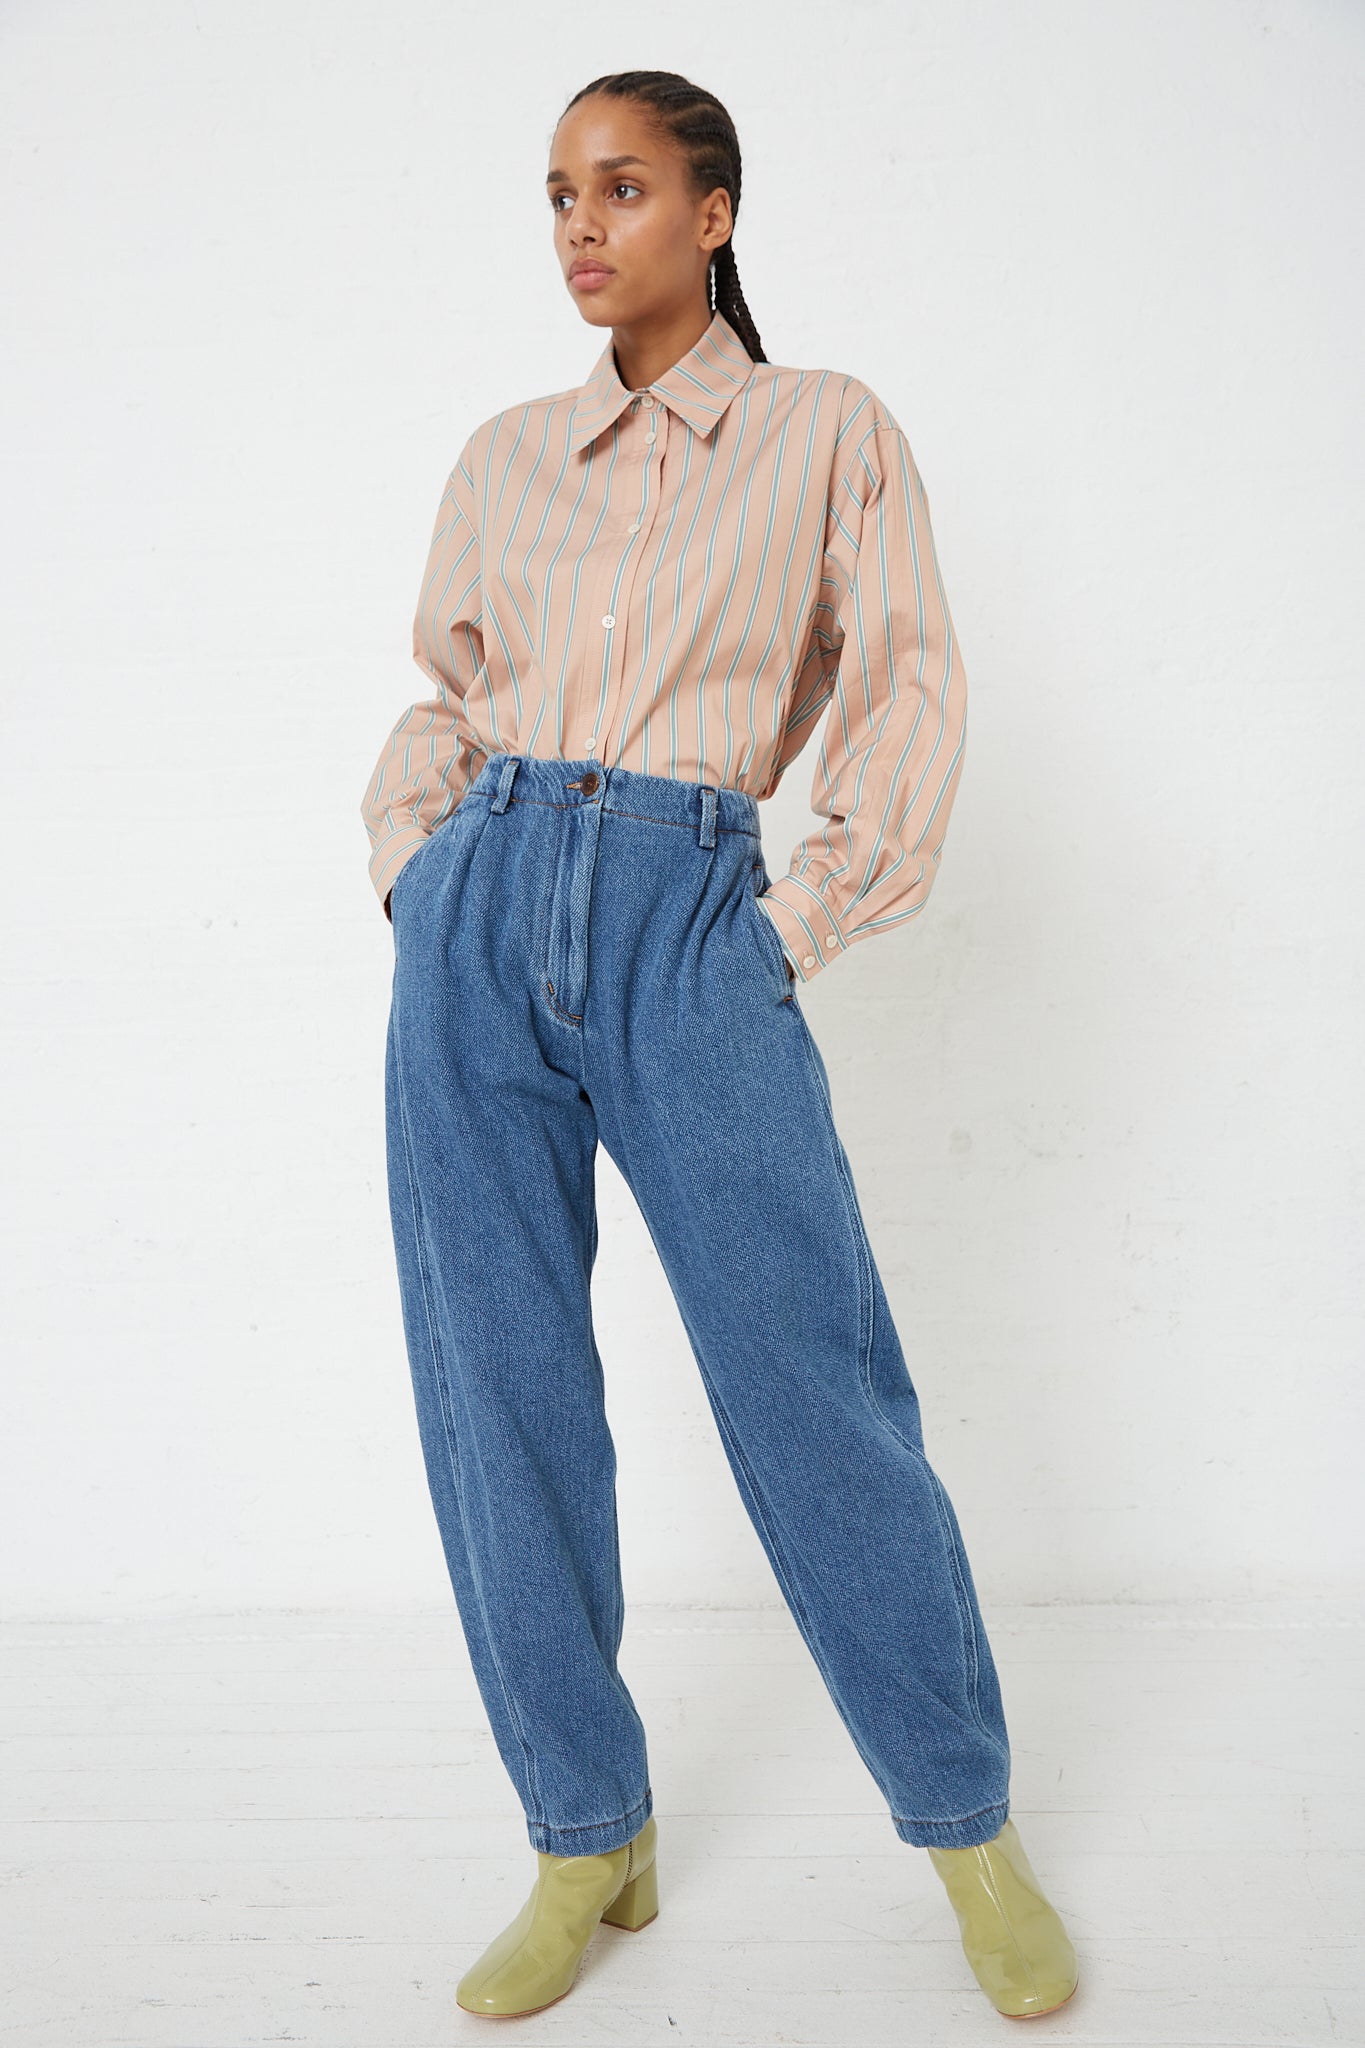 The model is wearing a striped shirt and washed Rachel Comey Denim Percy Pant in Indigo.